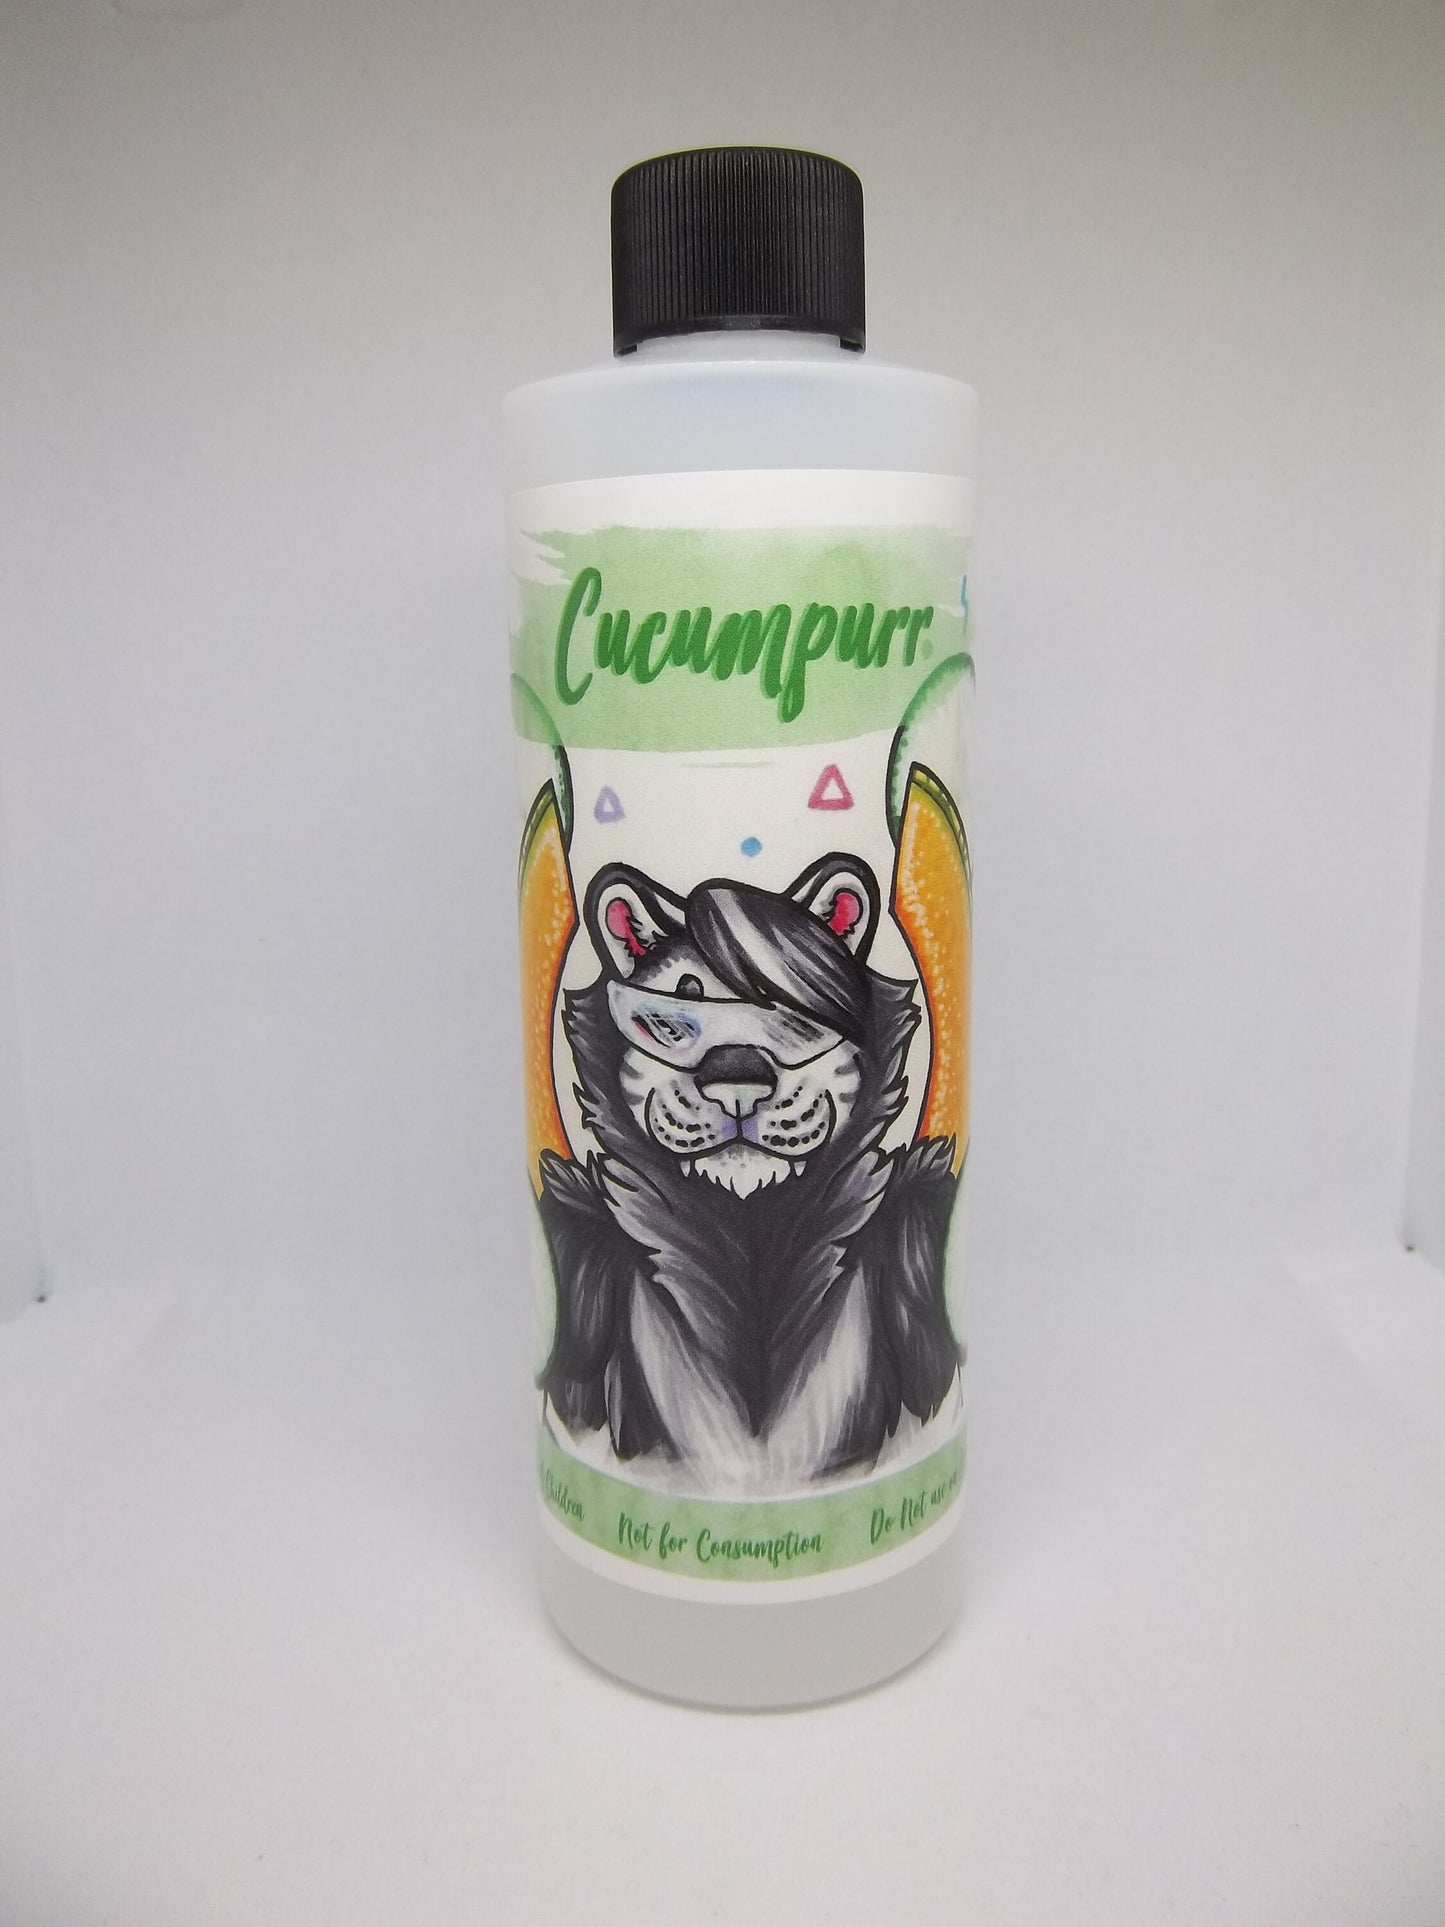 Fursuit Spray Cucumber Melon Cucumpurr Bottle Fragrance and Cleaner 8oz Essential Cleaning Costume Cleaner US Buyers Only